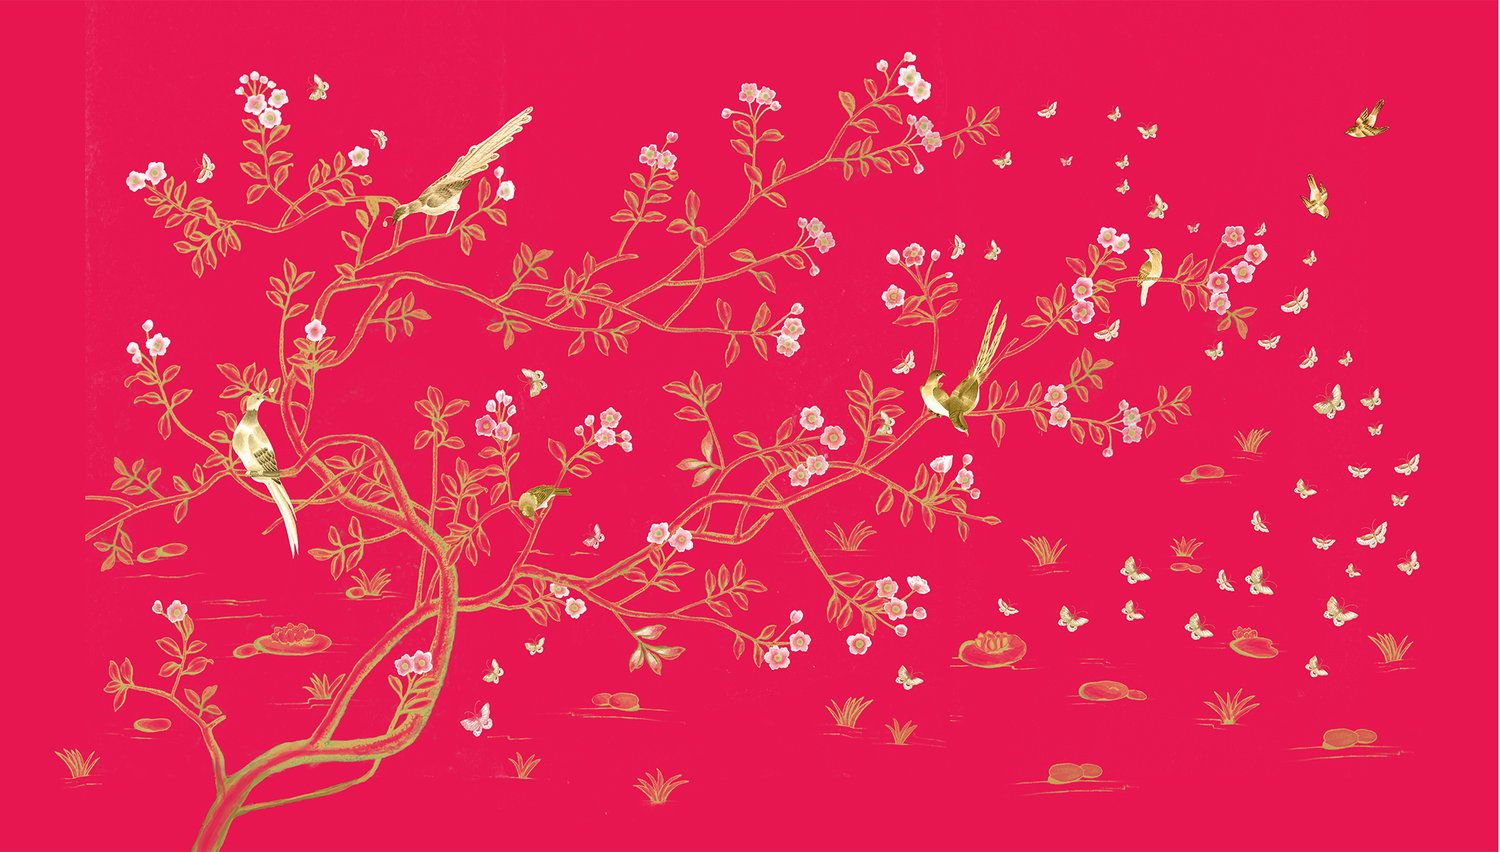 A chinoiserie design of birds and blossoms on a red background. - Crimson